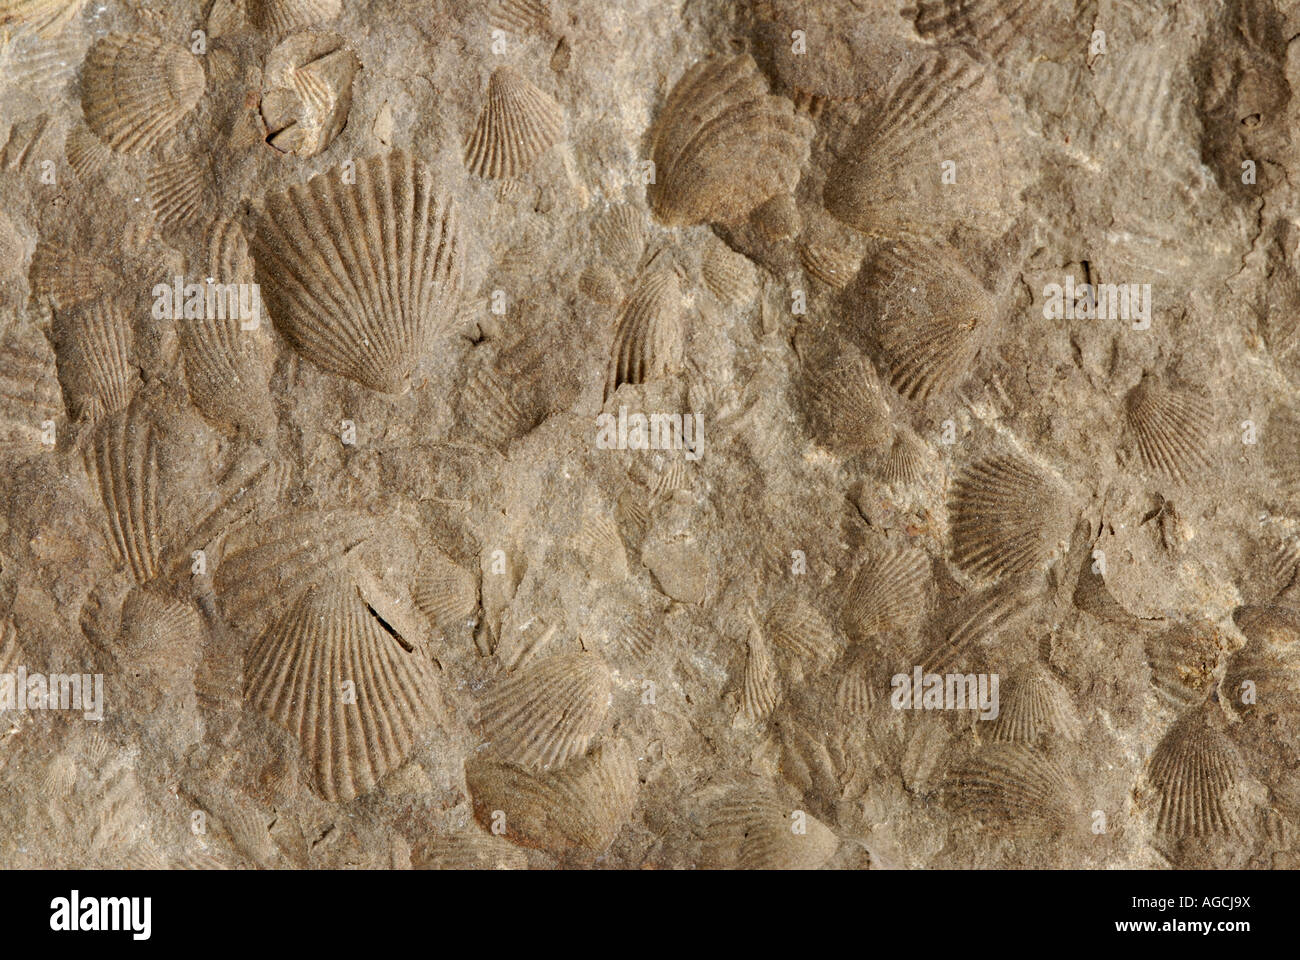 Rock with fossils of ancient scallops. Stock Photo